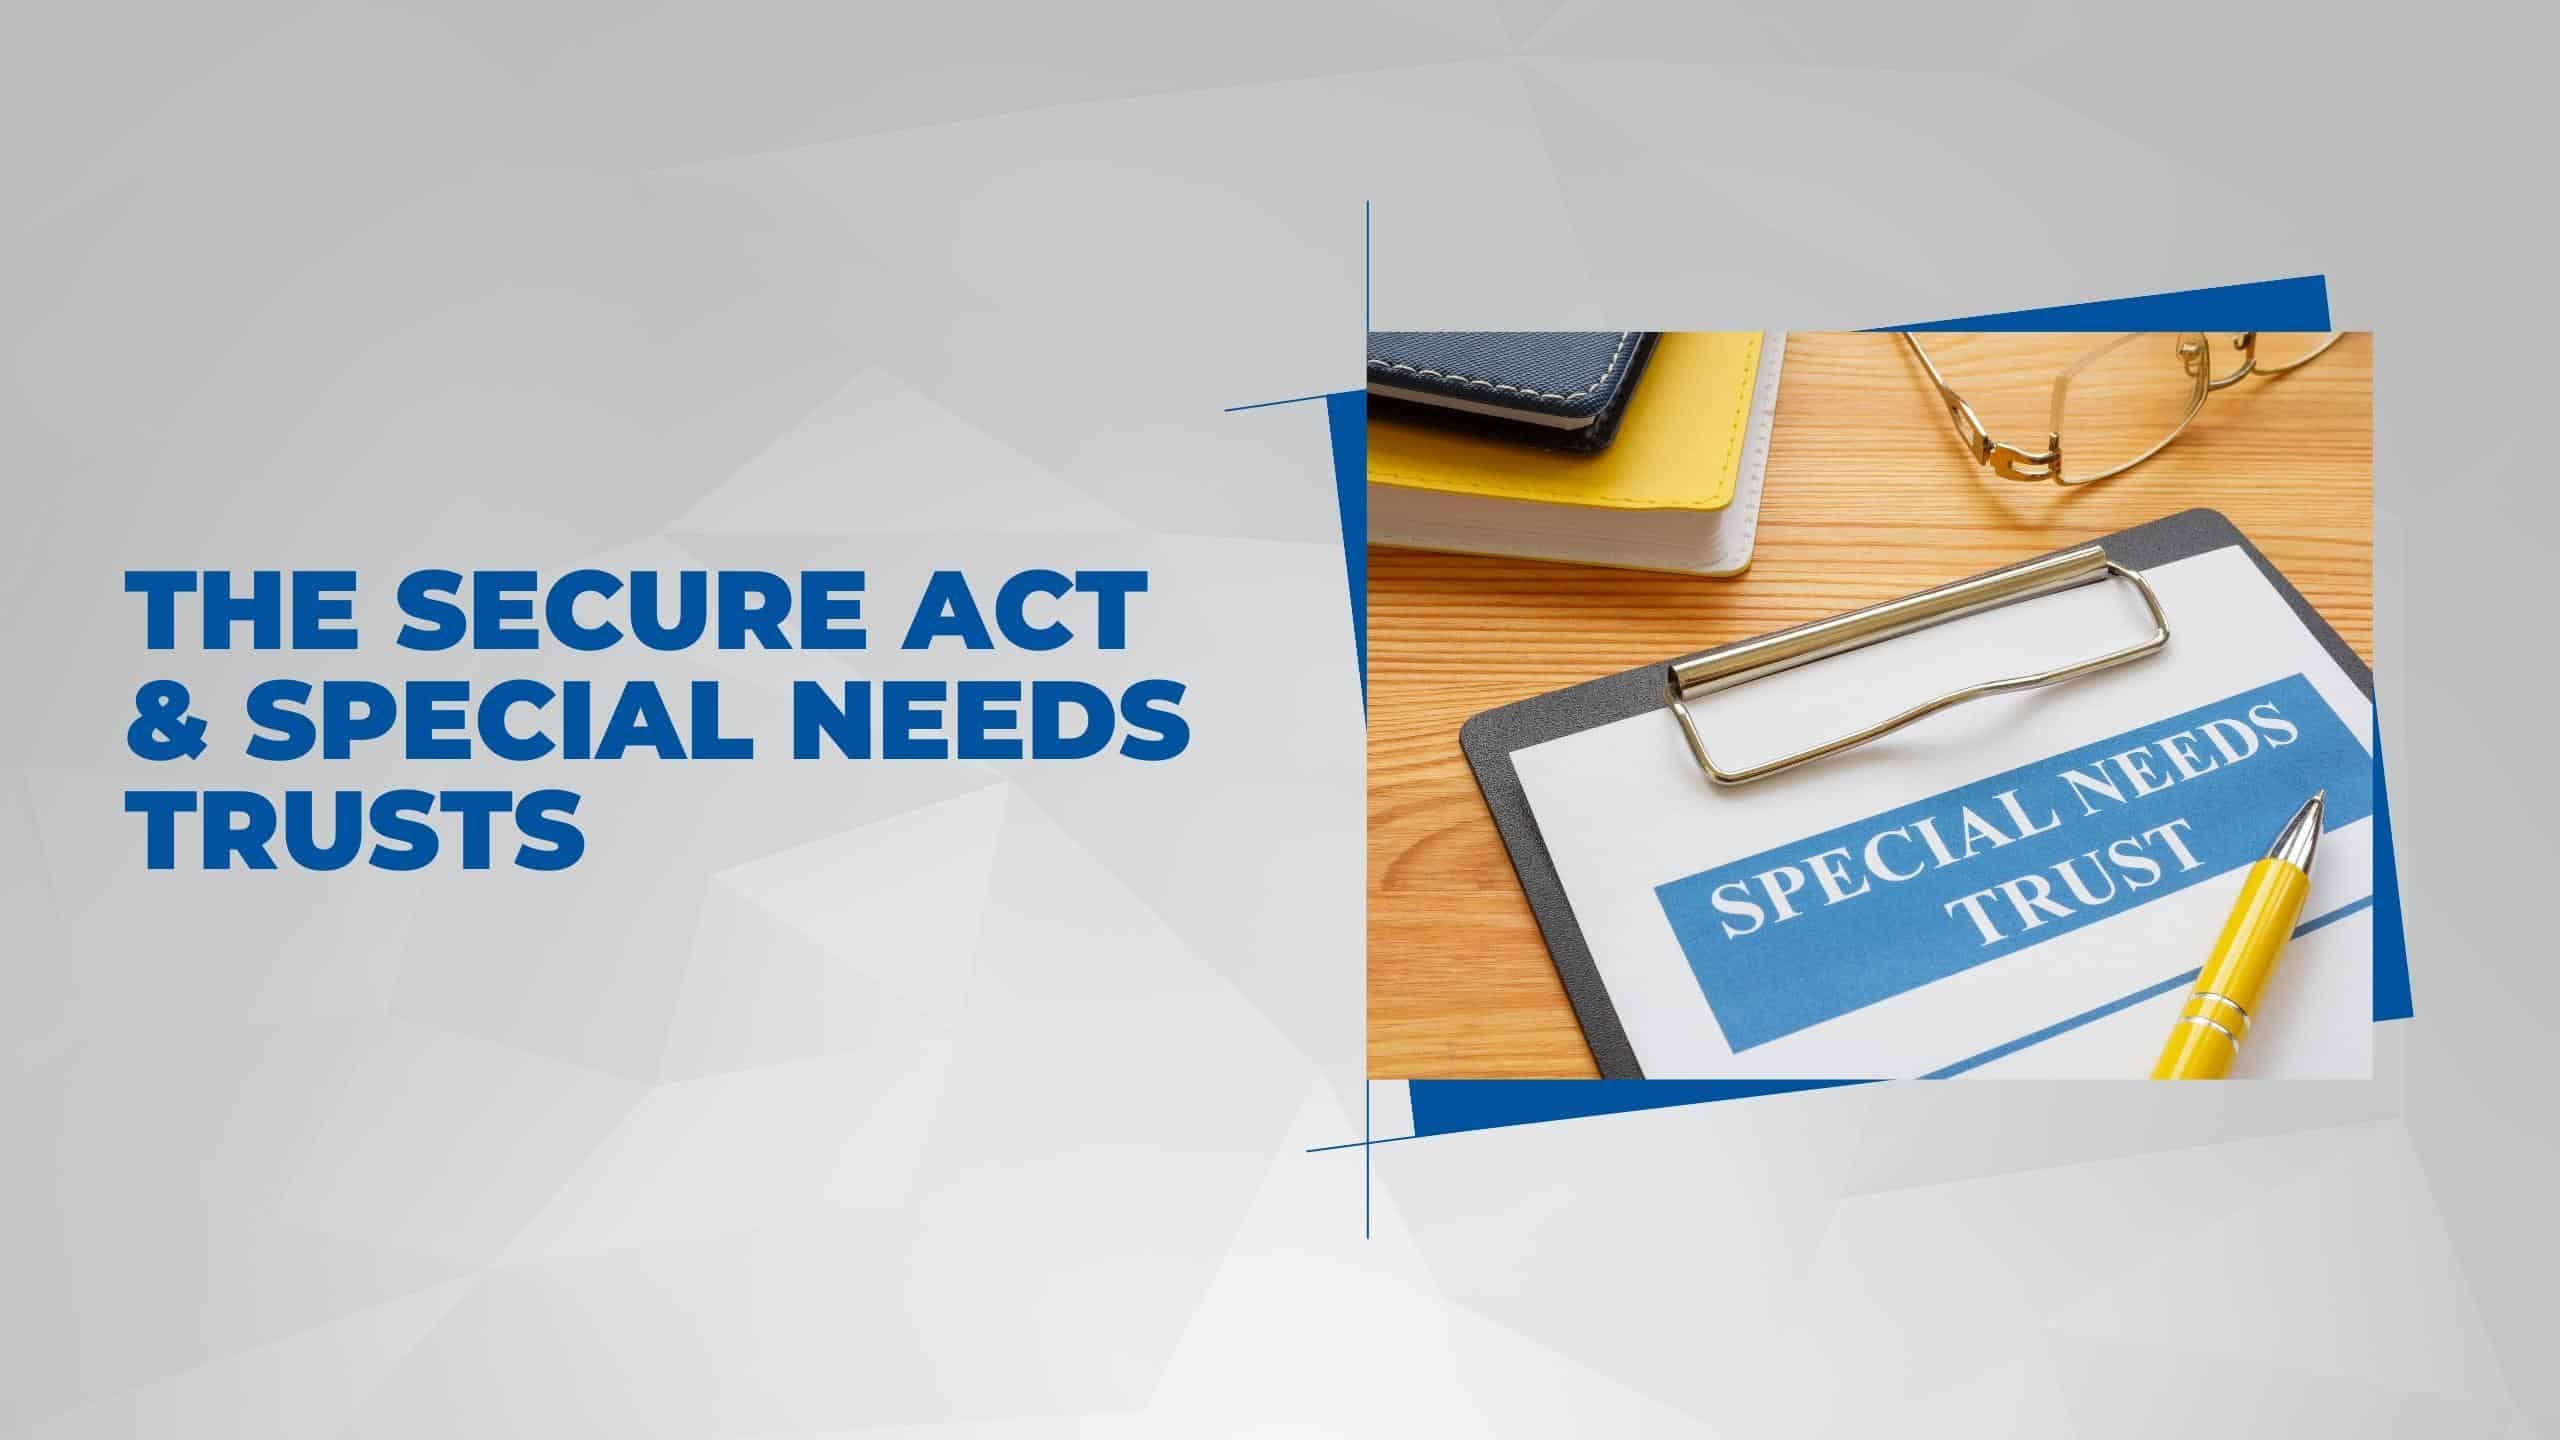 The SECURE Act & Special Needs Trusts